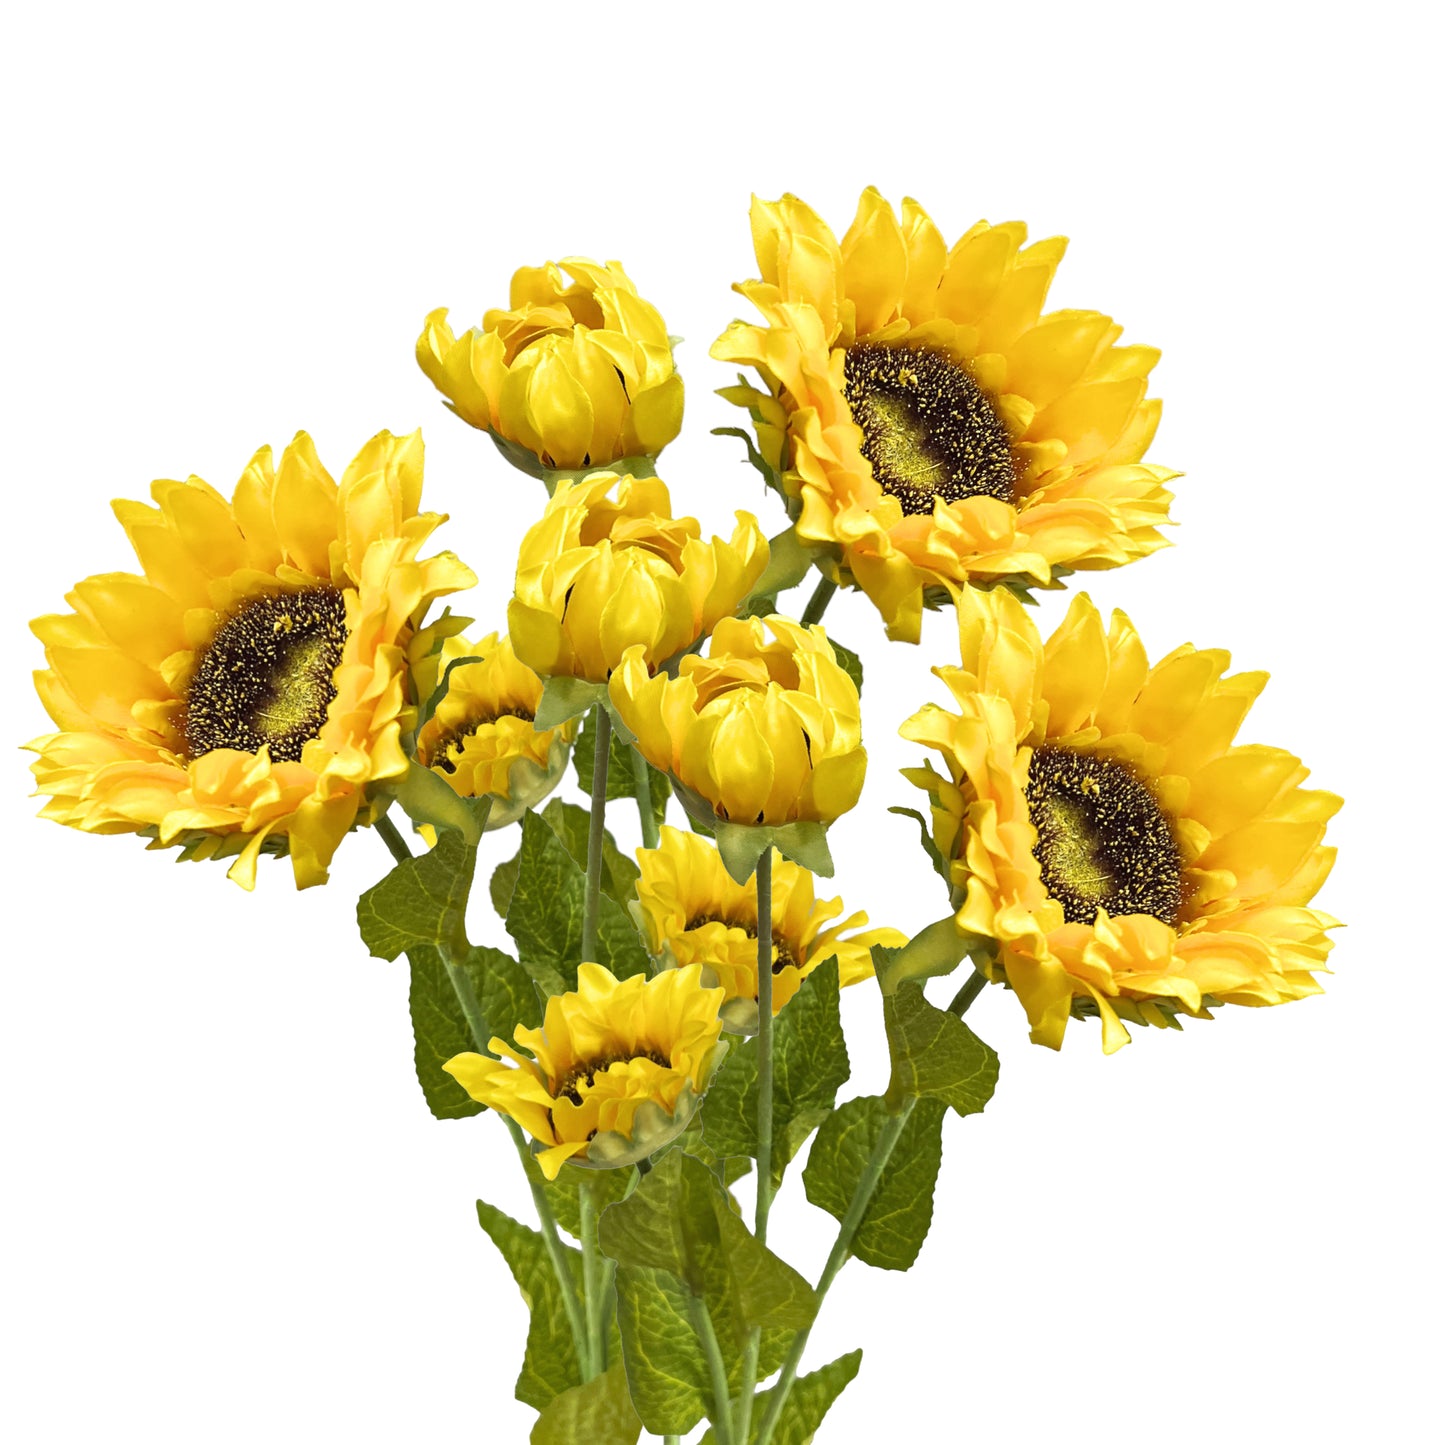 Set of 3 Artificial Sunflower Stems - 26 inches Tall